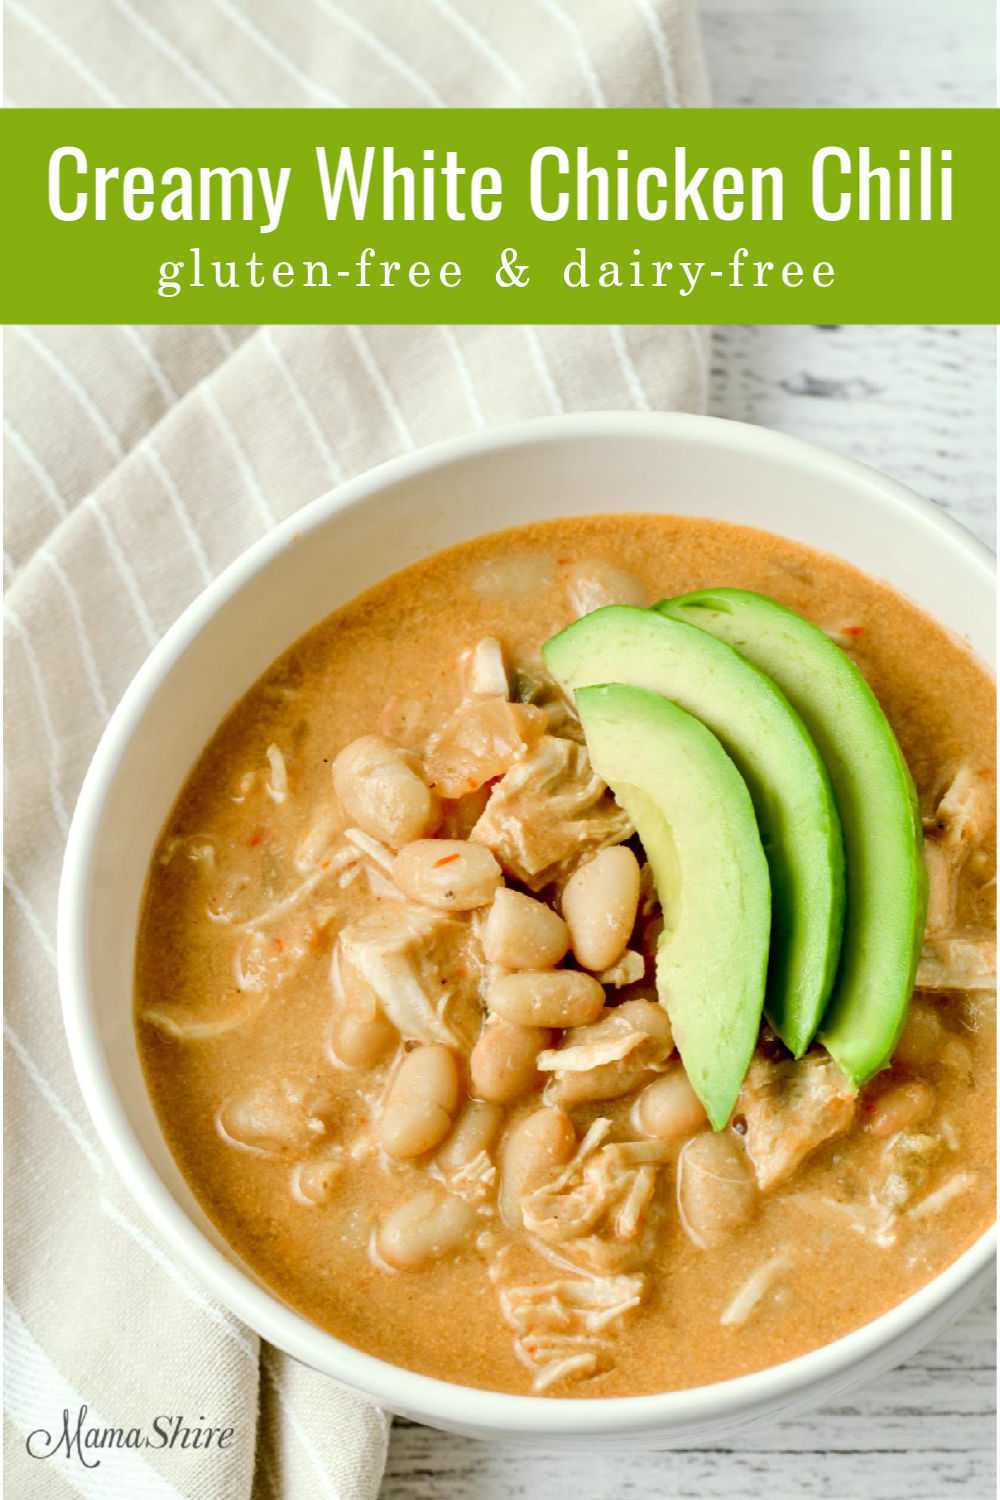 A bowl of gluten-free and dairy-free white chicken chili.